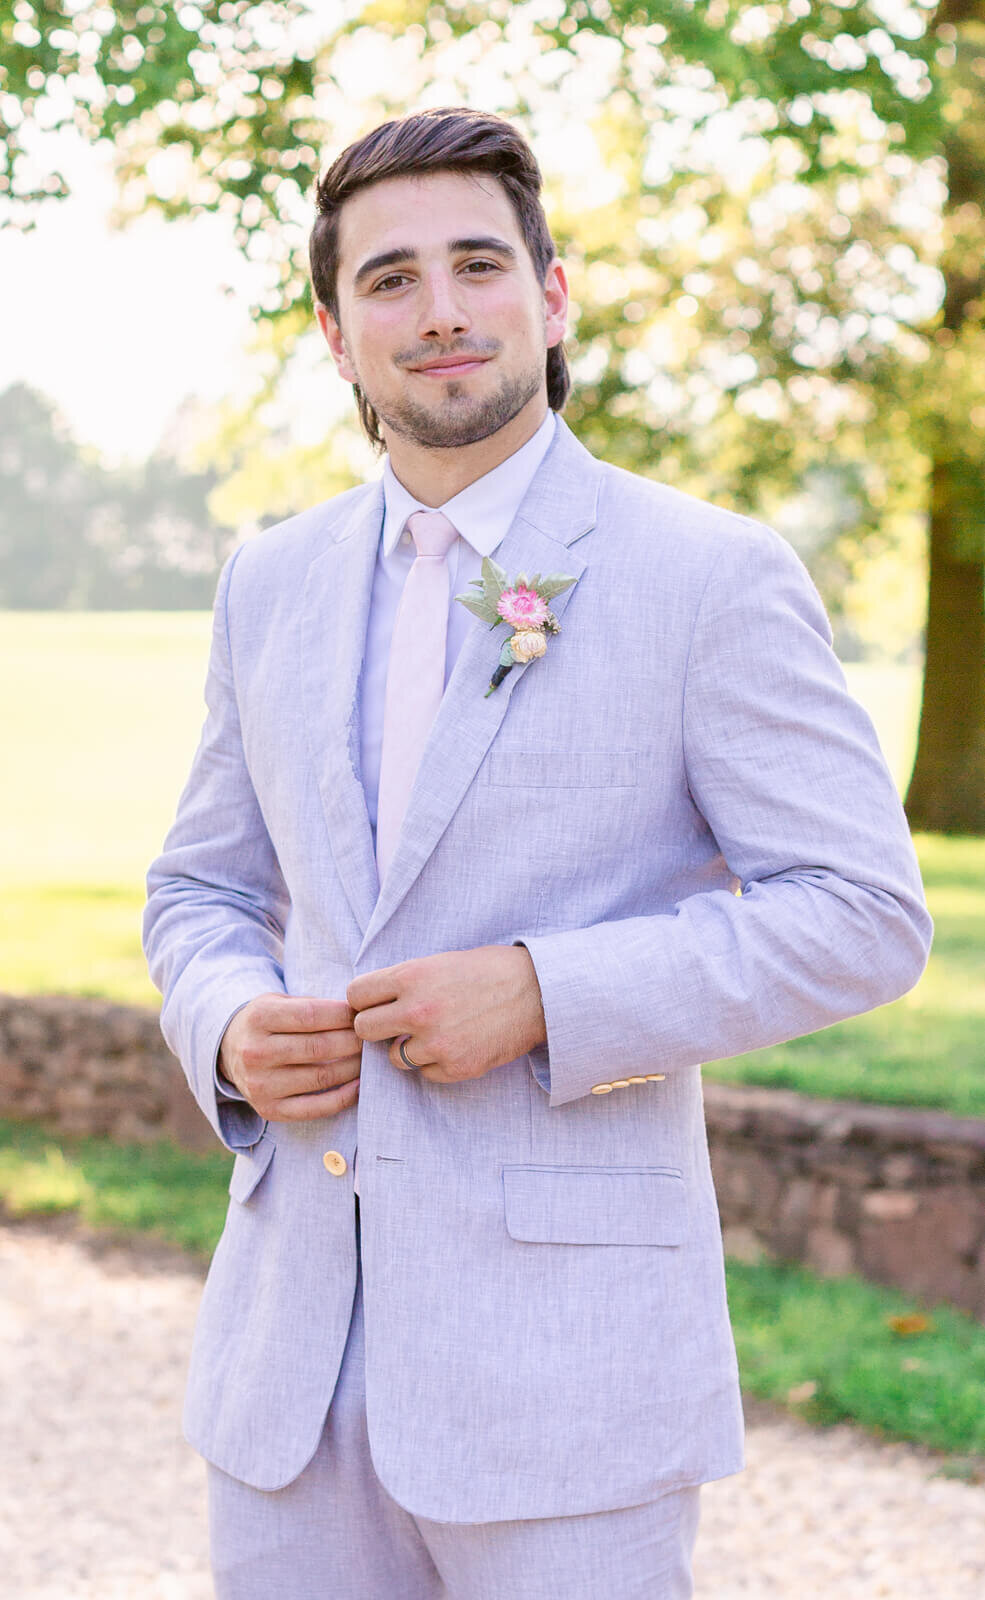 Groom buttoning suit jacket during getting ready photos at Great Marsh Estate. Captured by Bethany Aubre Photography.